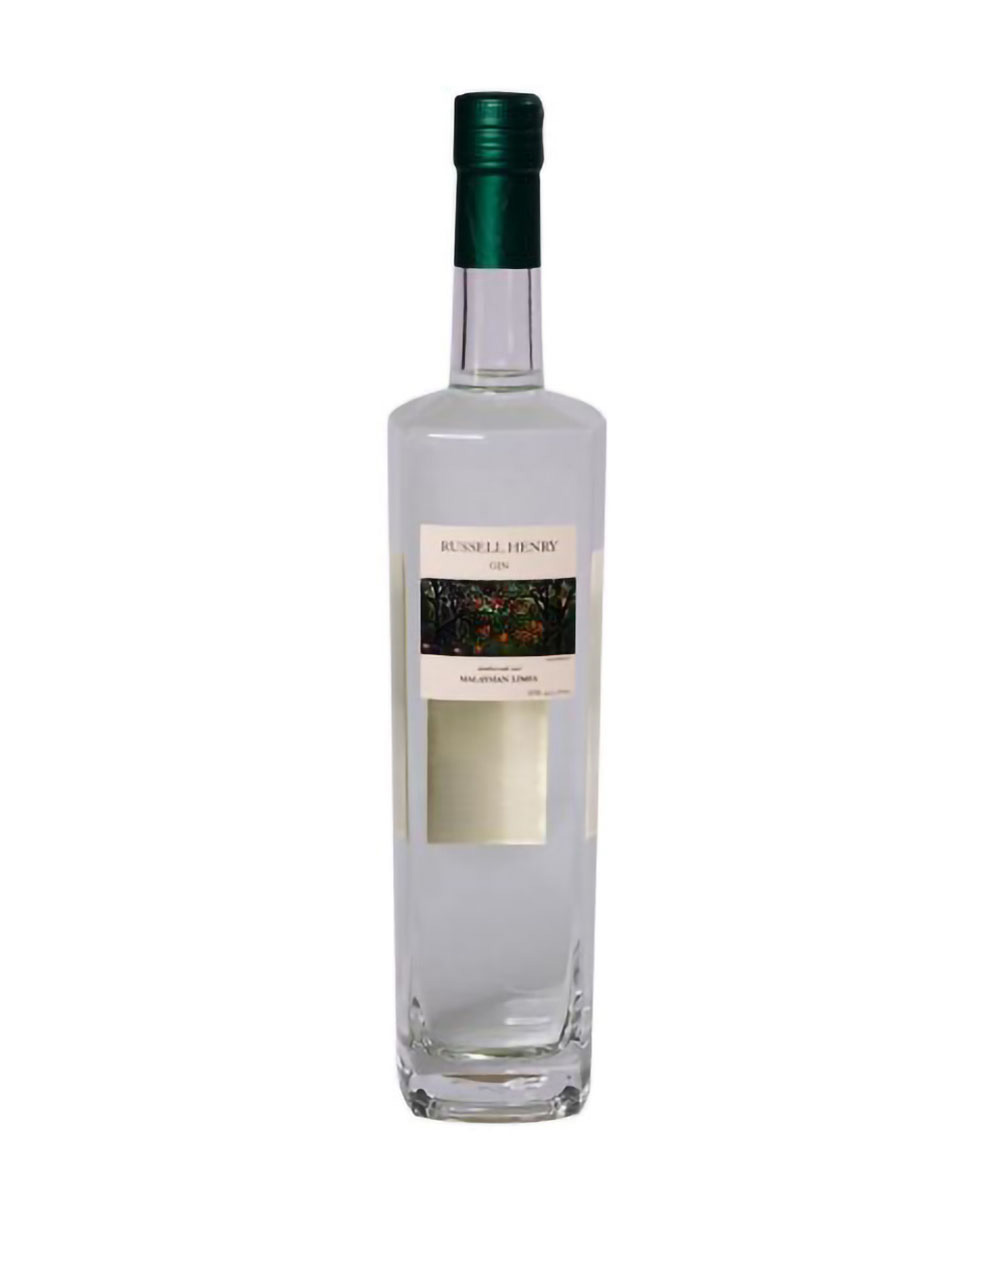 Russell Henry Malaysian Lime Gin